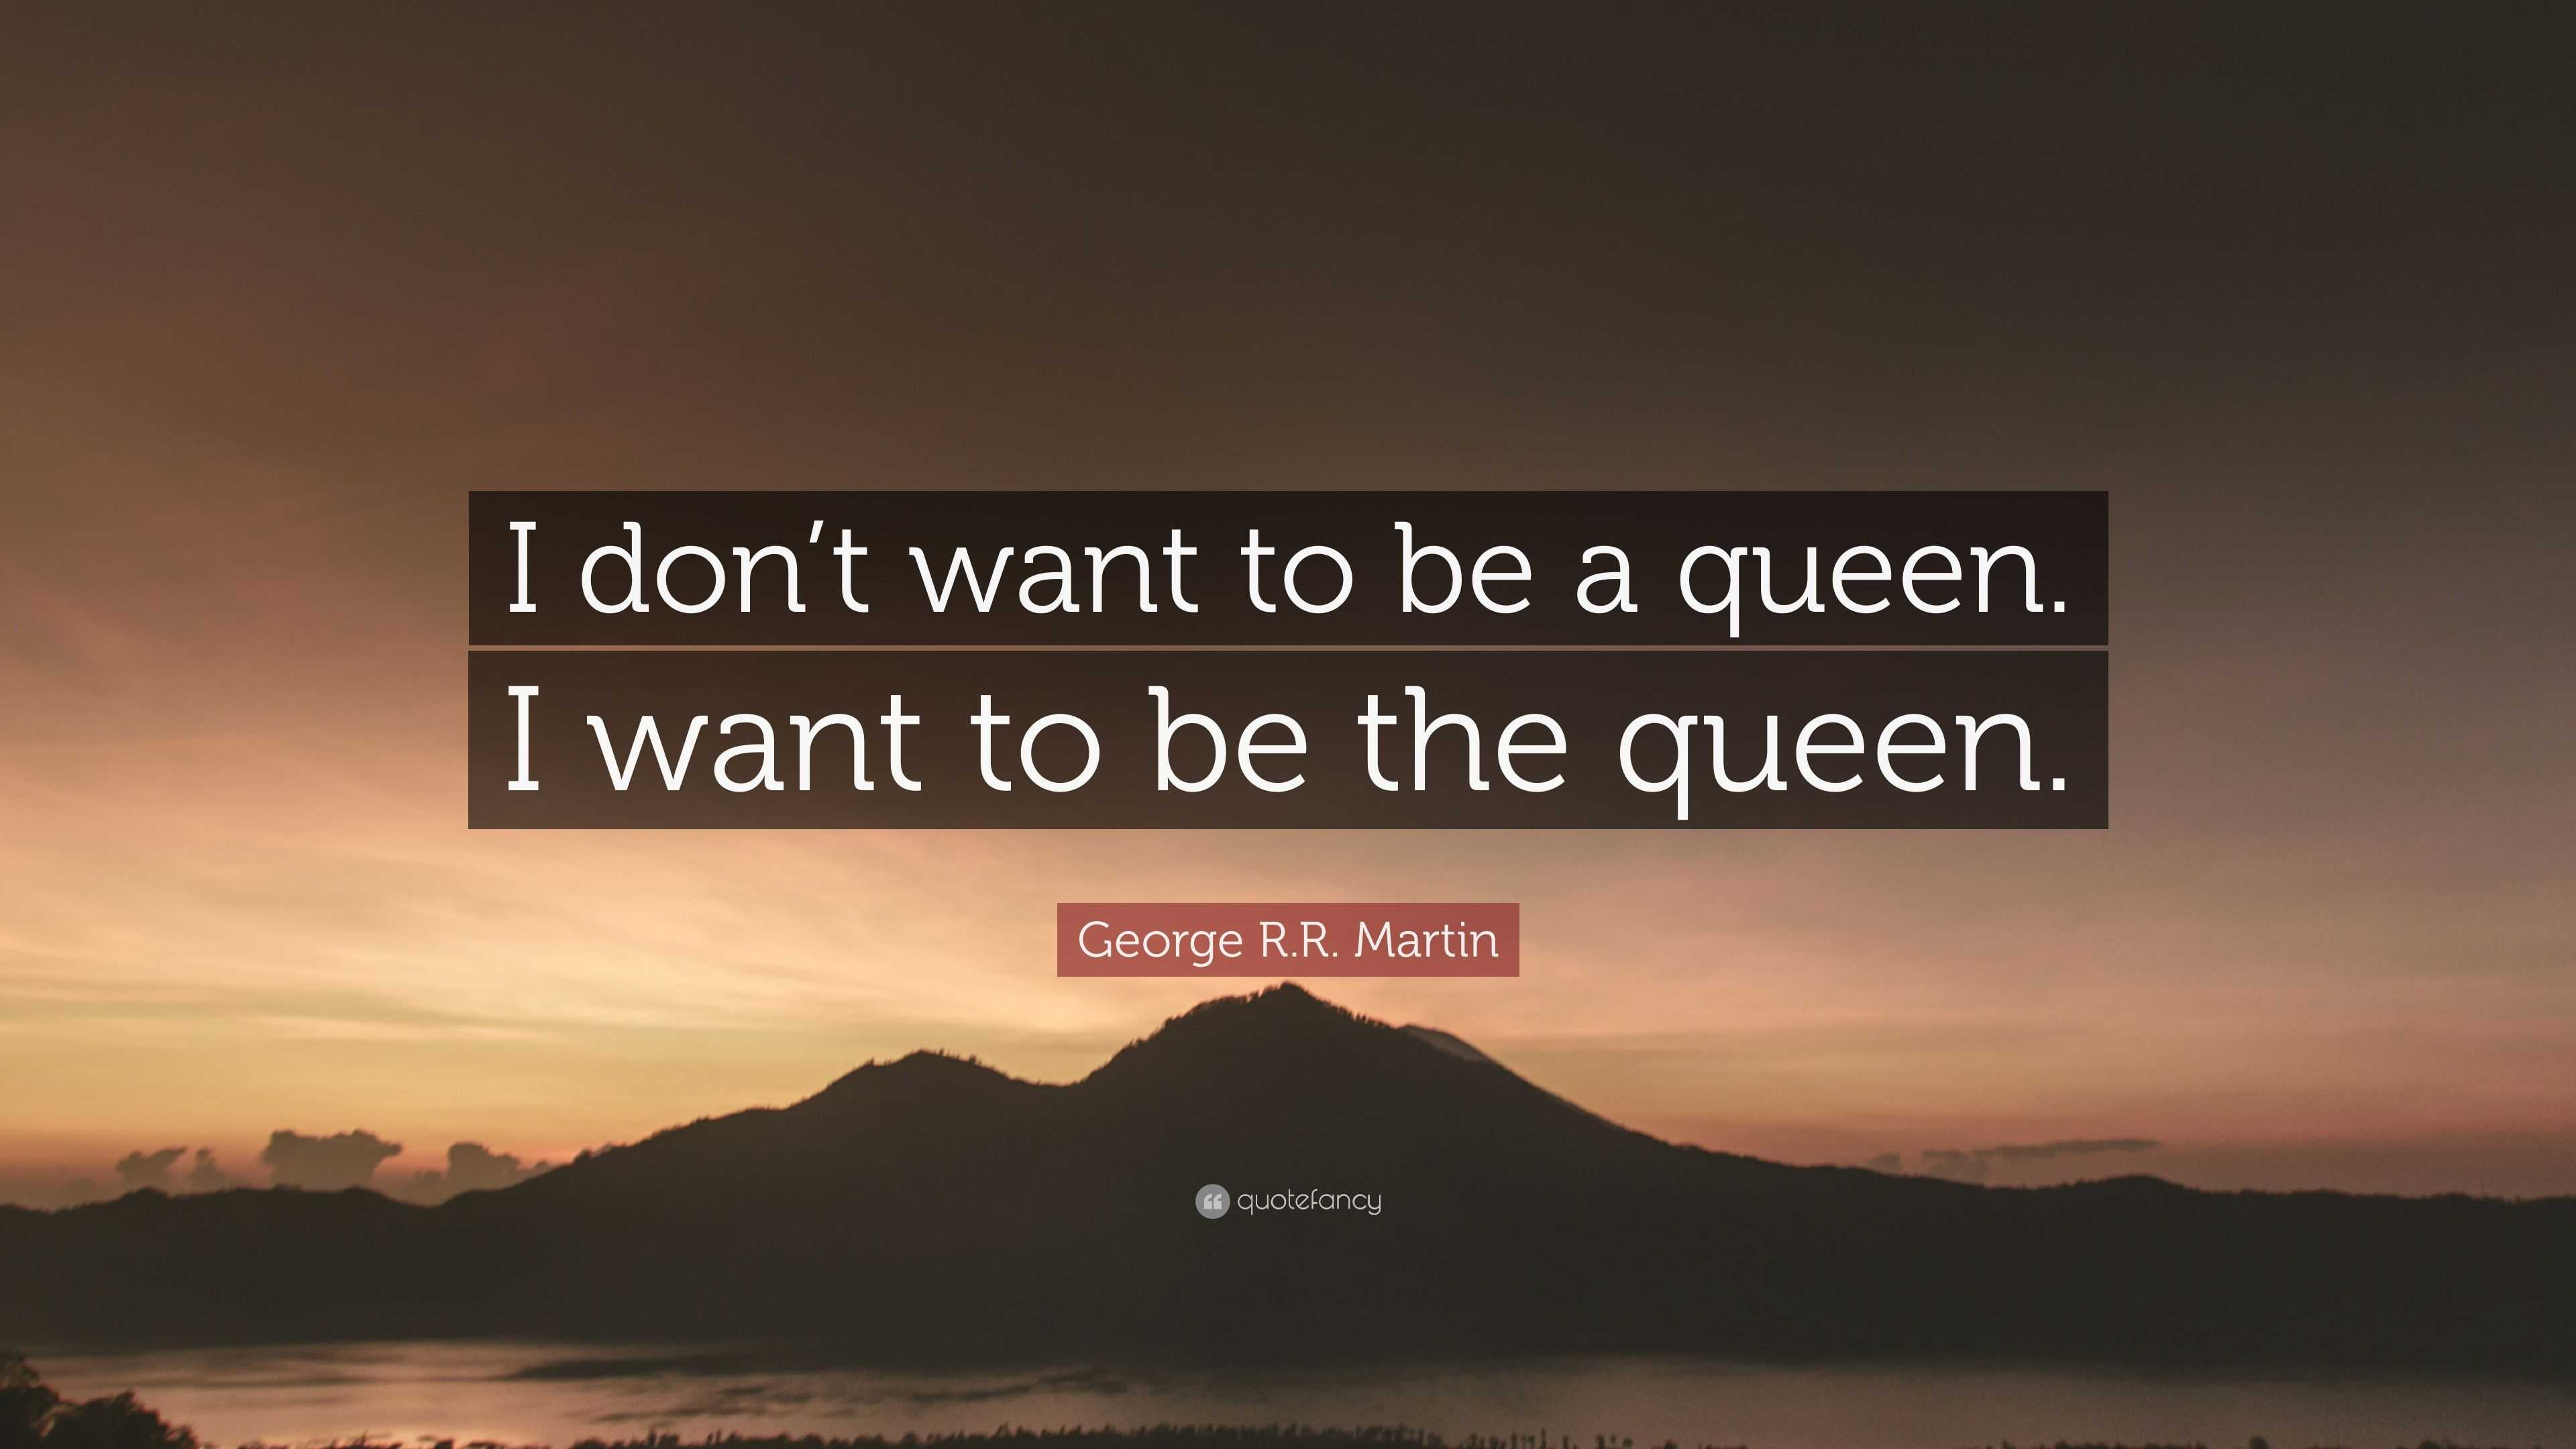 George R.R. Martin Quote: “I don’t want to be a queen. I want to be the ...